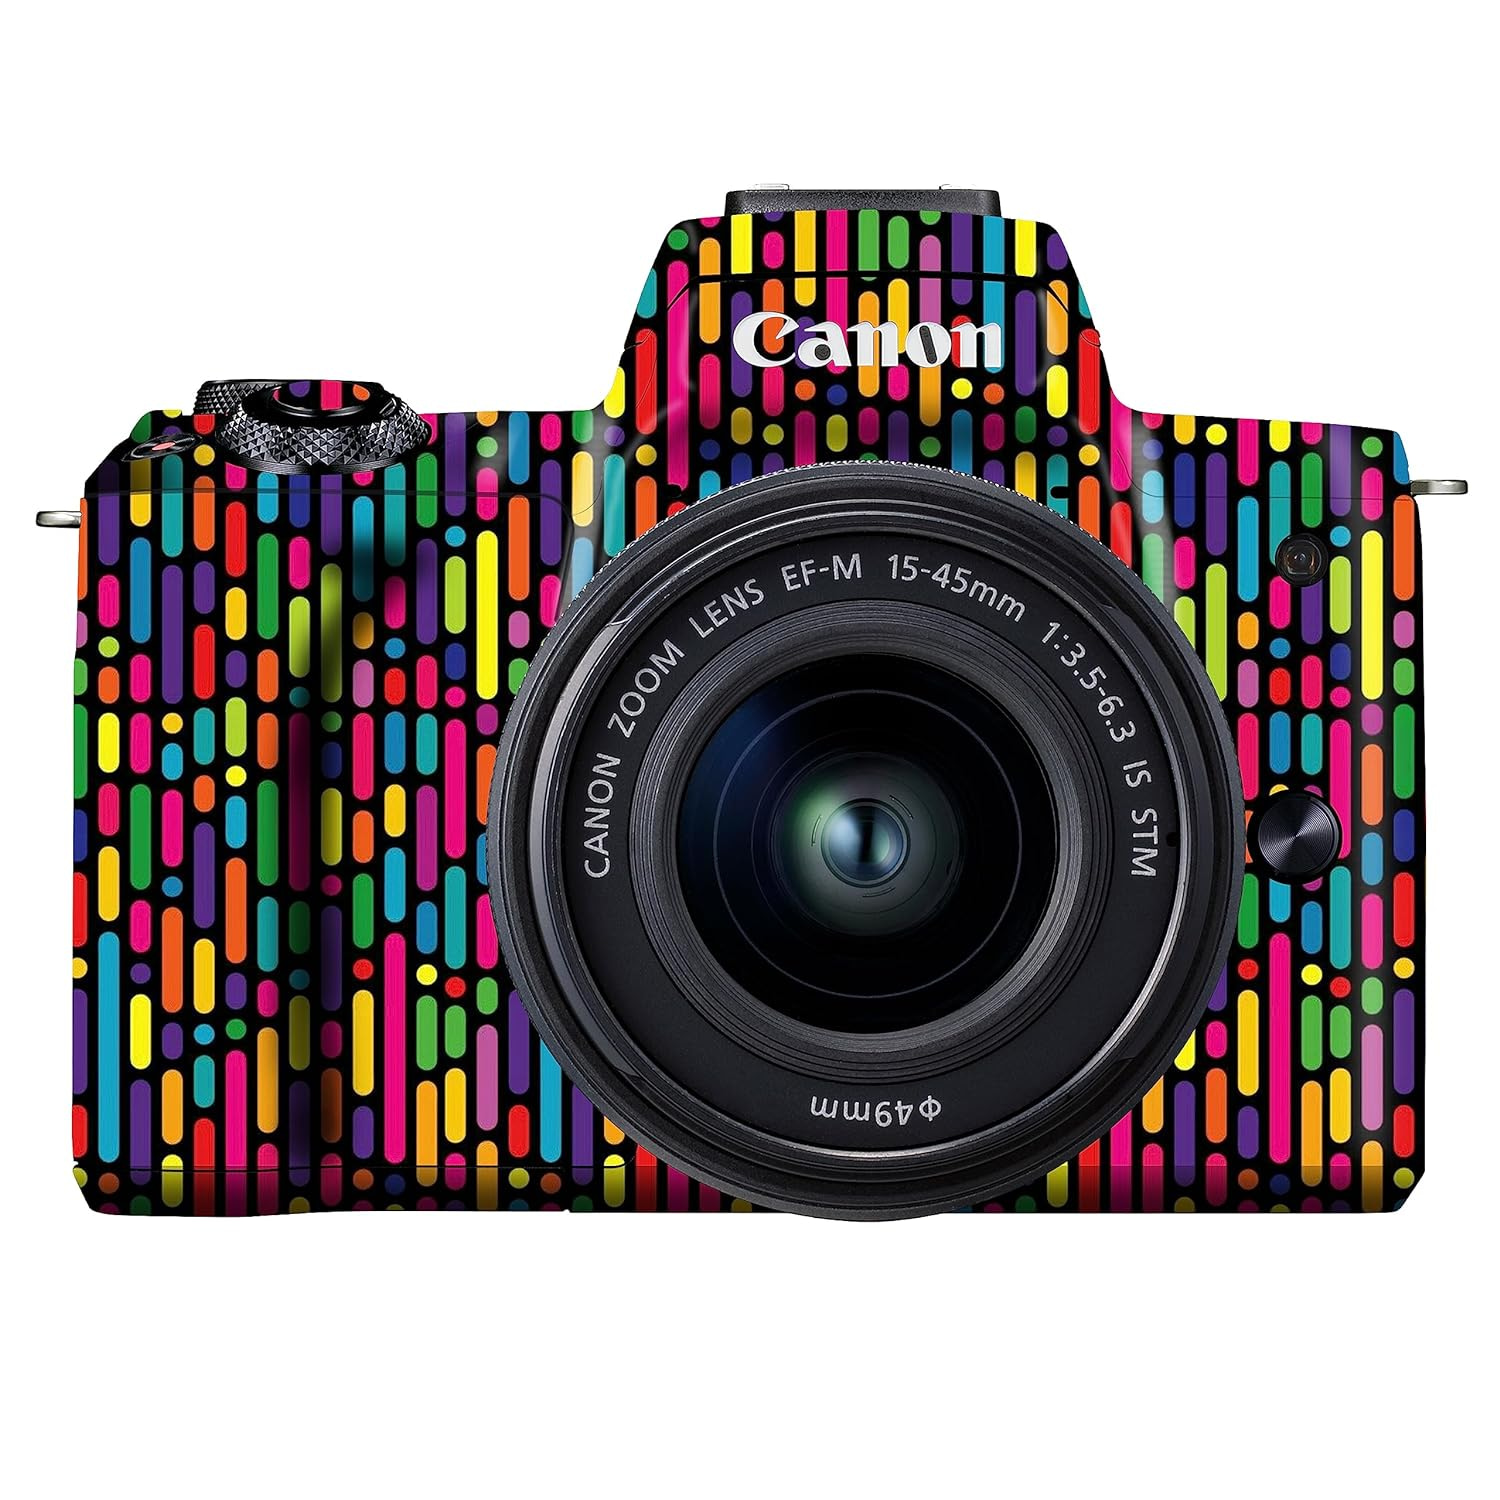 Read more about the article WRAPTURE. Premium DSLR Camera Scratchproof Protective Skin for Canon M50 Mark II – No Residue Removal, Bubble Free, Scratch Resistant, Stretchable, HD Quality Printed – HDCS 016